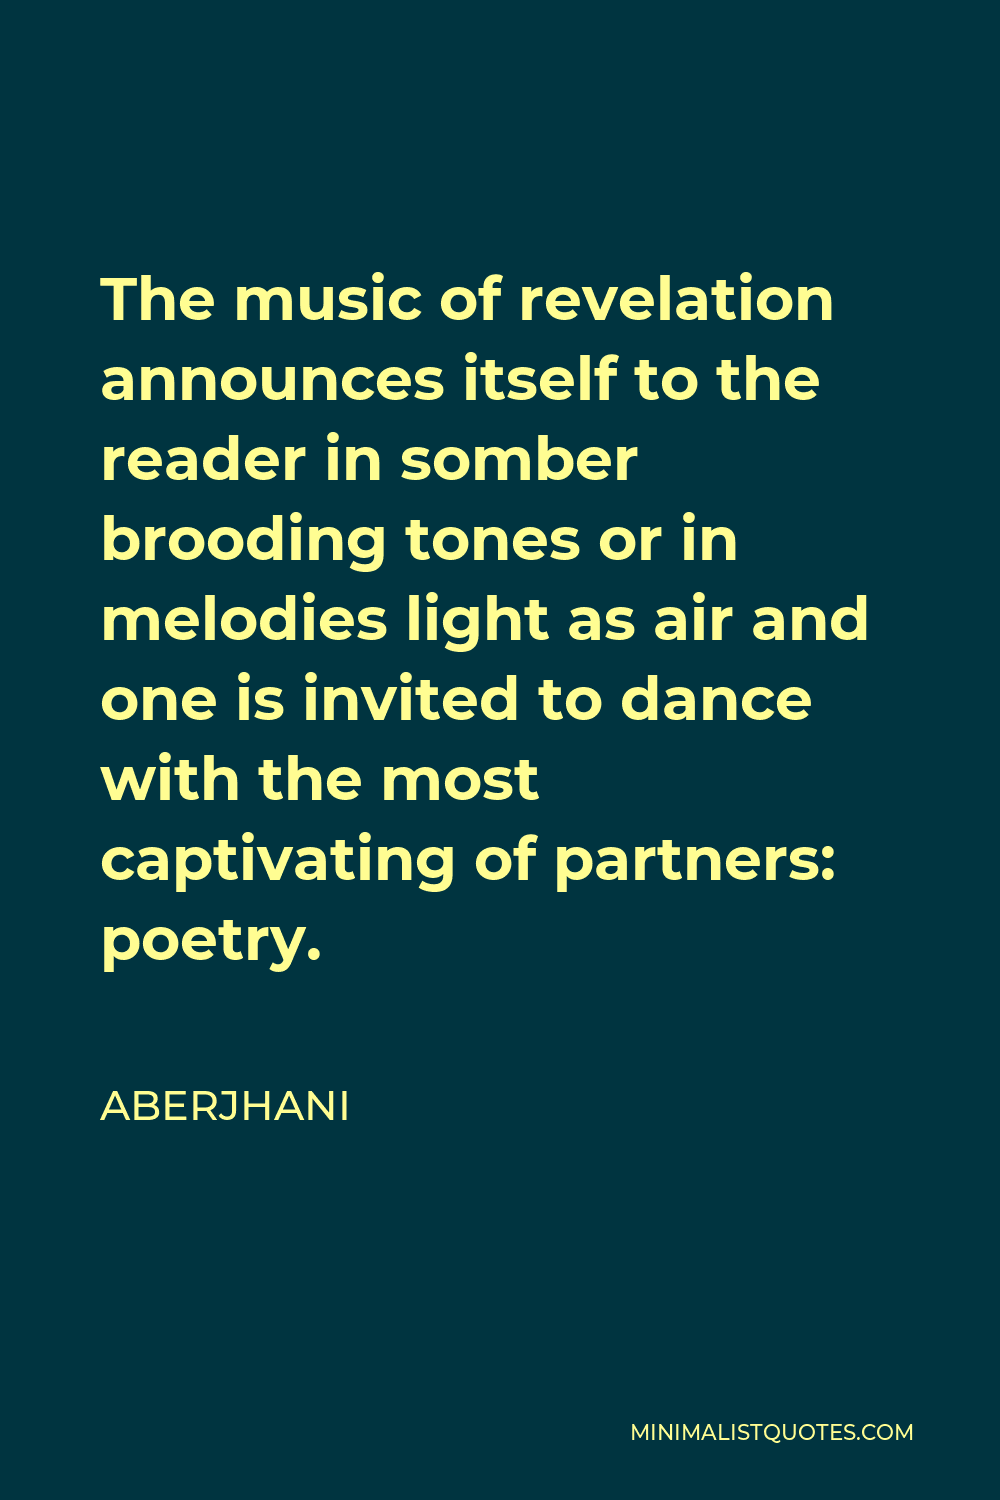 Aberjhani Quote - The music of revelation announces itself to the reader in somber brooding tones or in melodies light as air and one is invited to dance with the most captivating of partners: poetry.